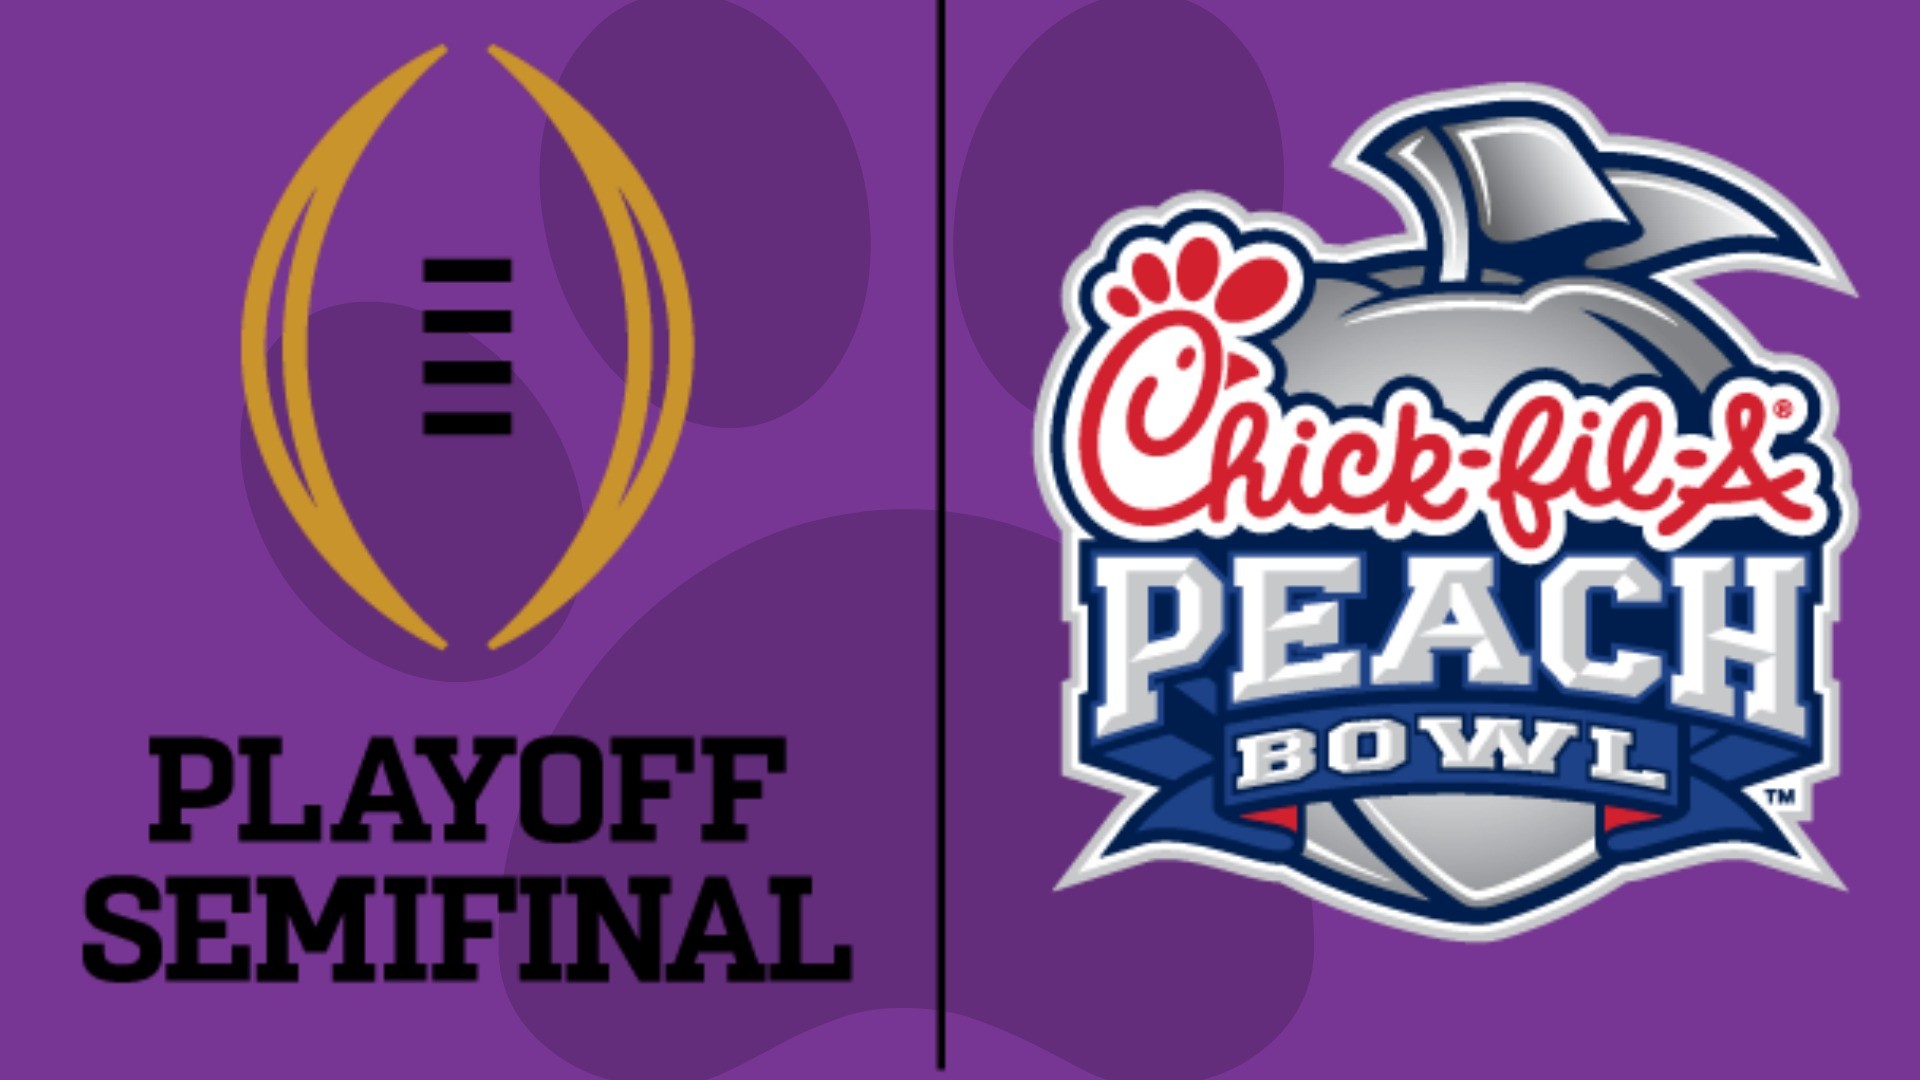 1920x1080 UW fans get free Chick-fil-A all week before the Peach Bowl | KING5.com